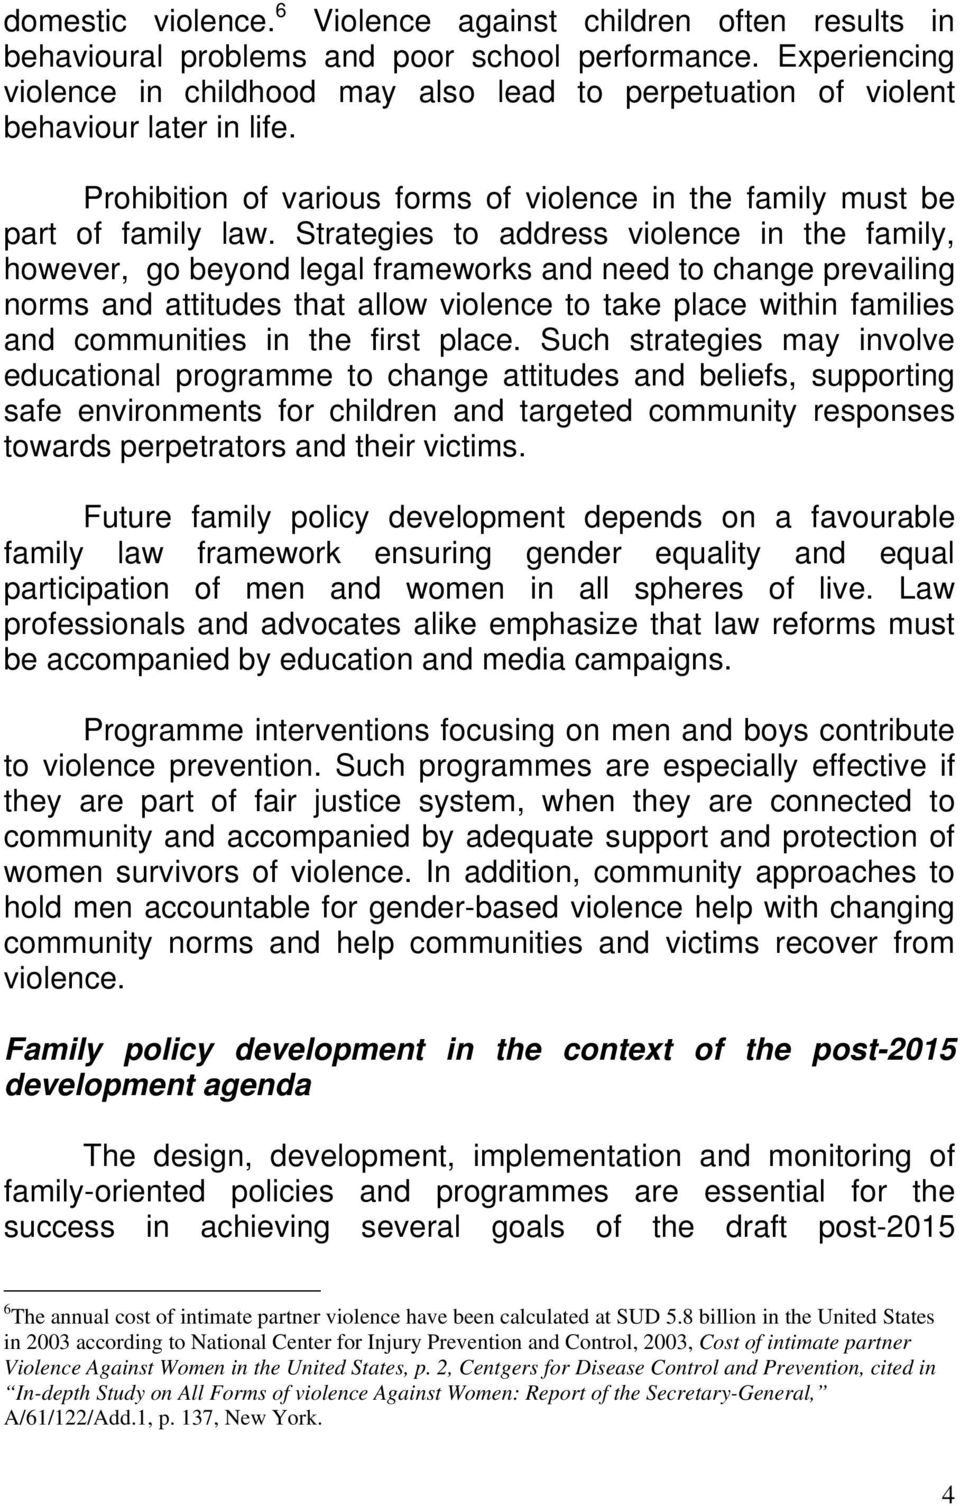 Strategies to address violence in the family, however, go beyond legal frameworks and need to change prevailing norms and attitudes that allow violence to take place within families and communities